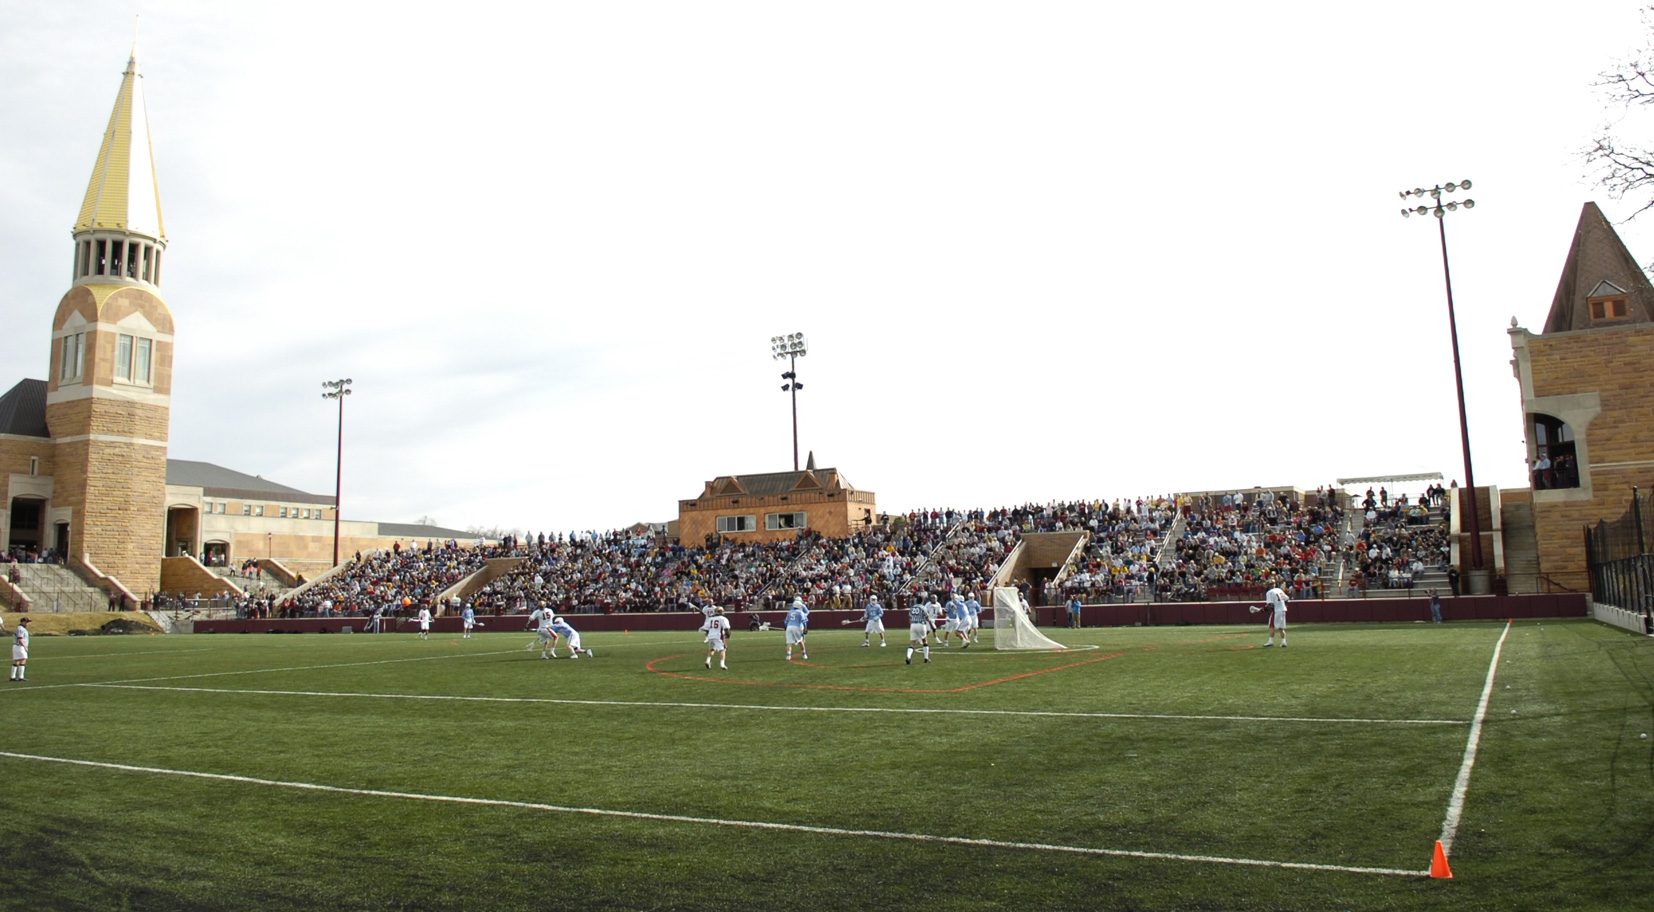 USA College 7s: University of Denver to host 2015 College 7s National Championships